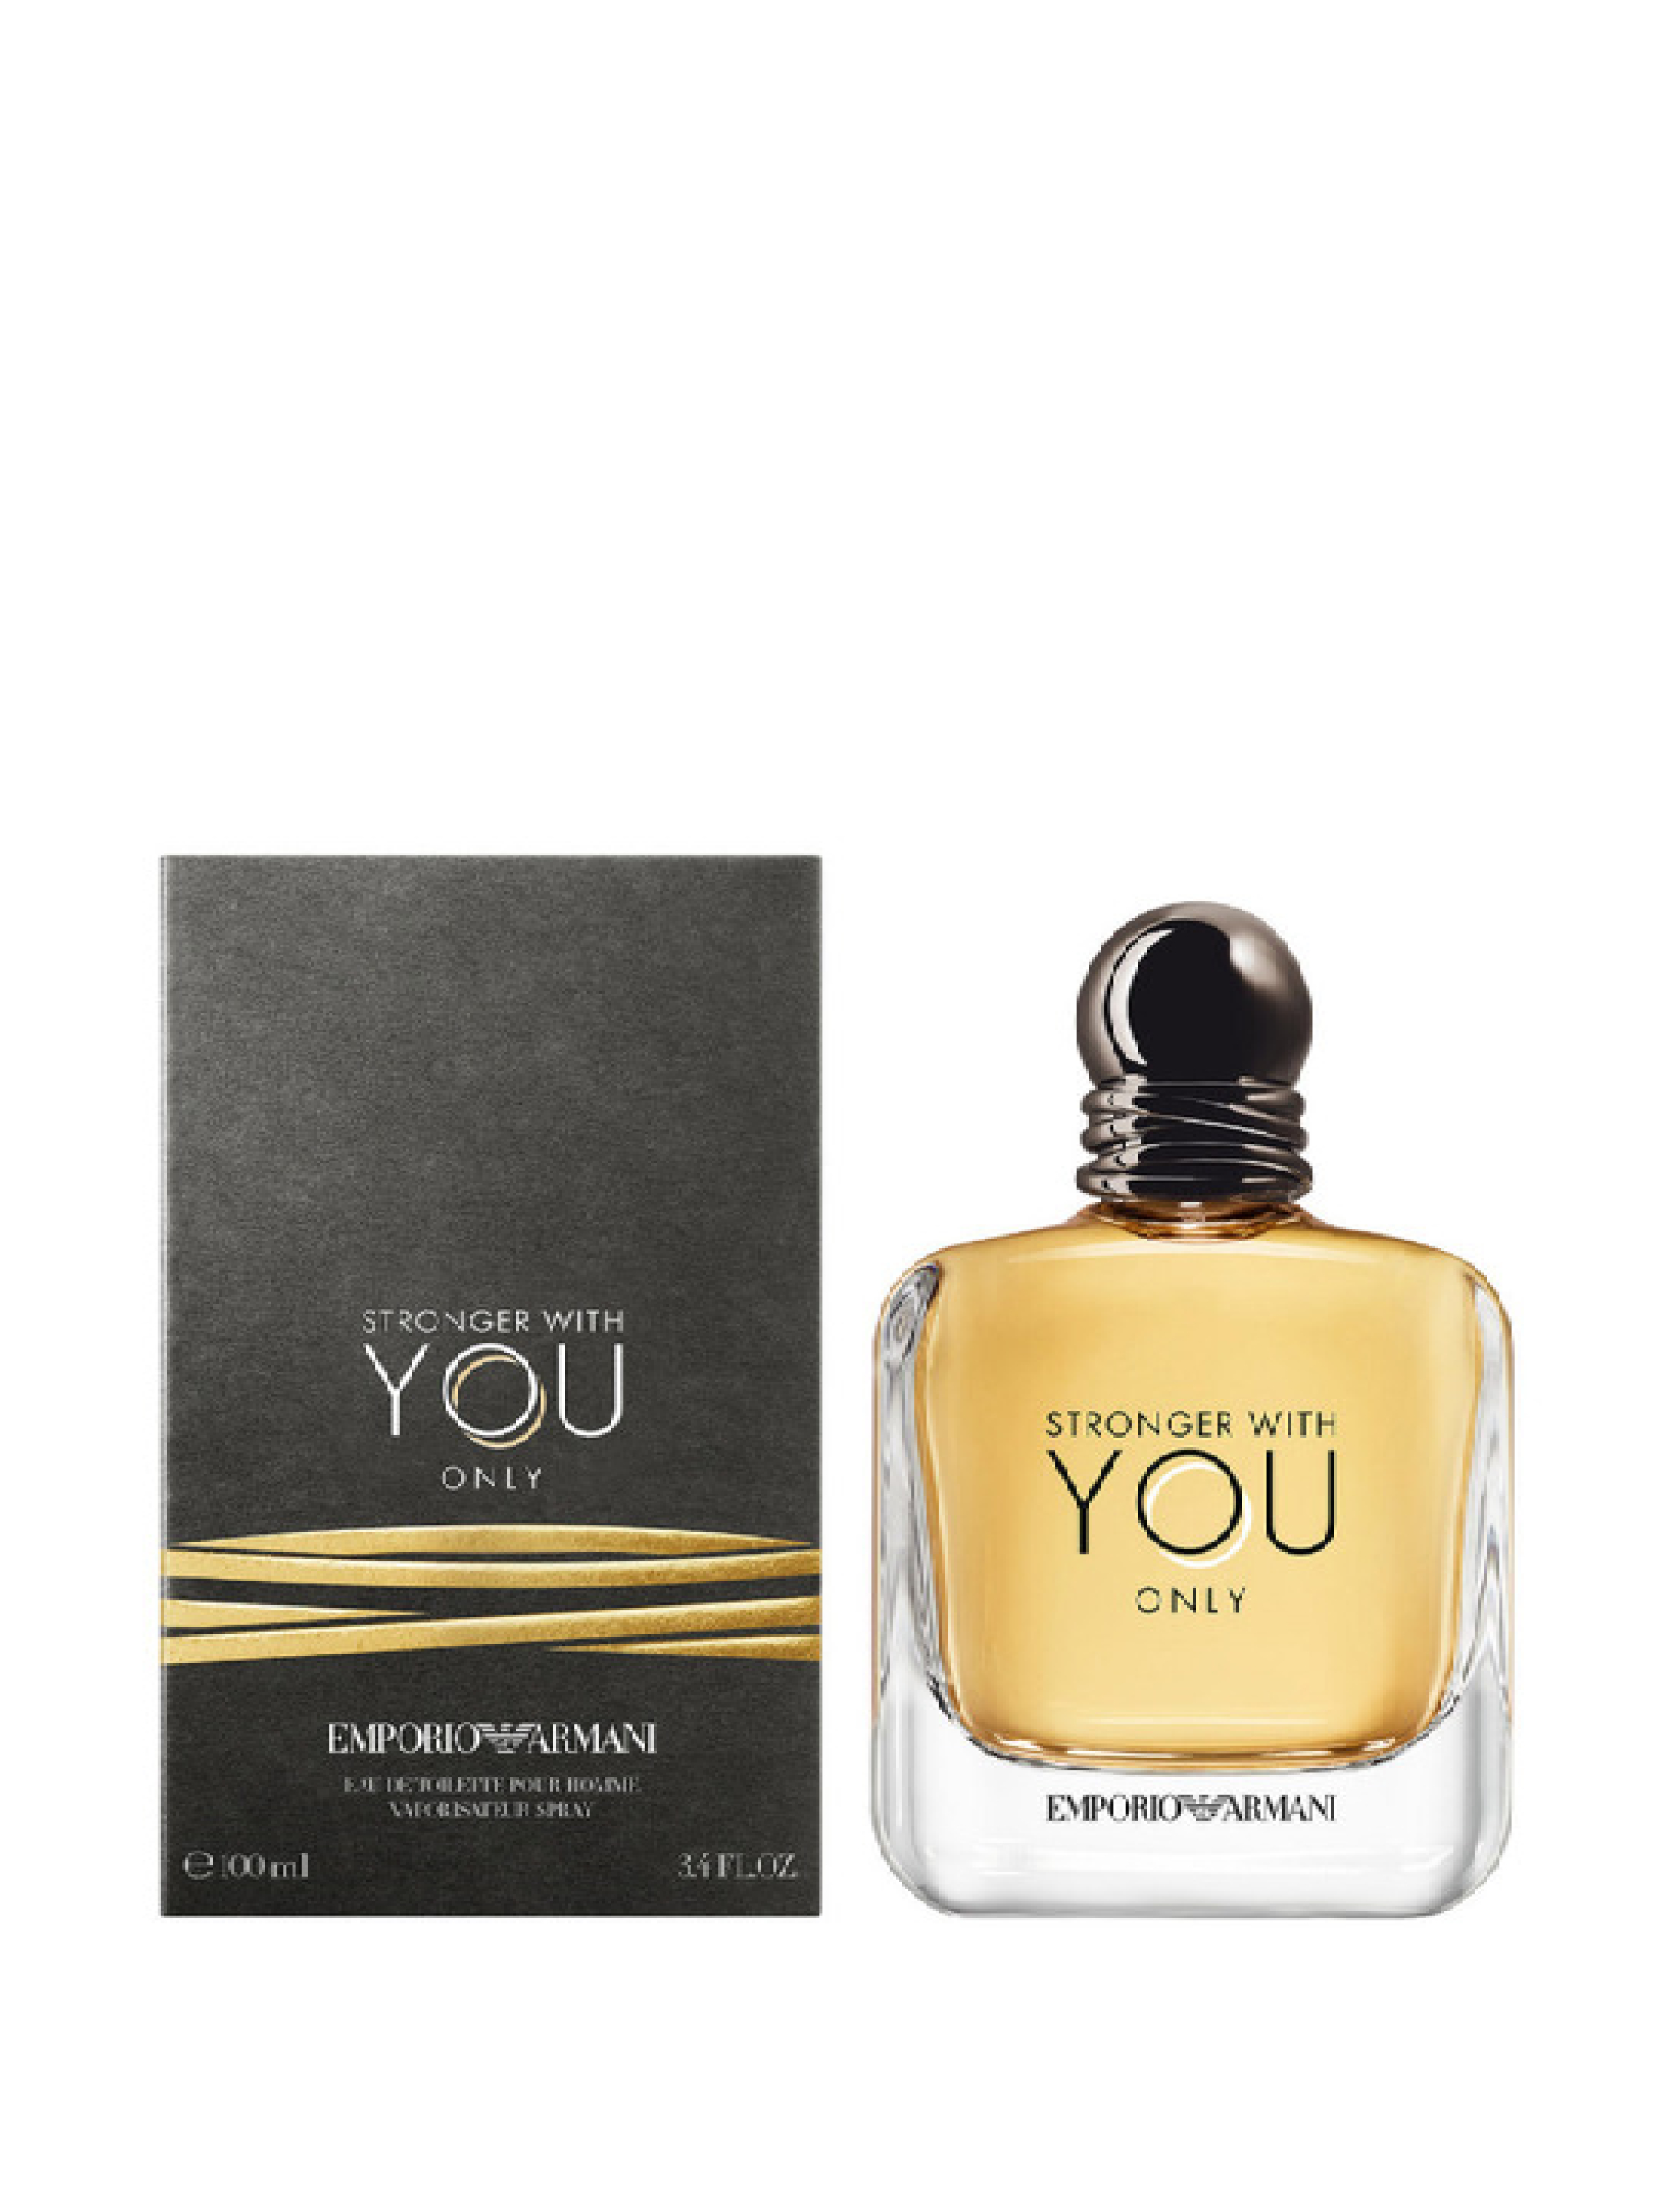 Туалетная вода strong. Emporio Armani stronger with you 100ml. Туалетная вода Emporio Armani stronger with you. Духи мужские Армани stronger with you. Giorgio Armani Emporio Armani stronger with you, 100 ml.